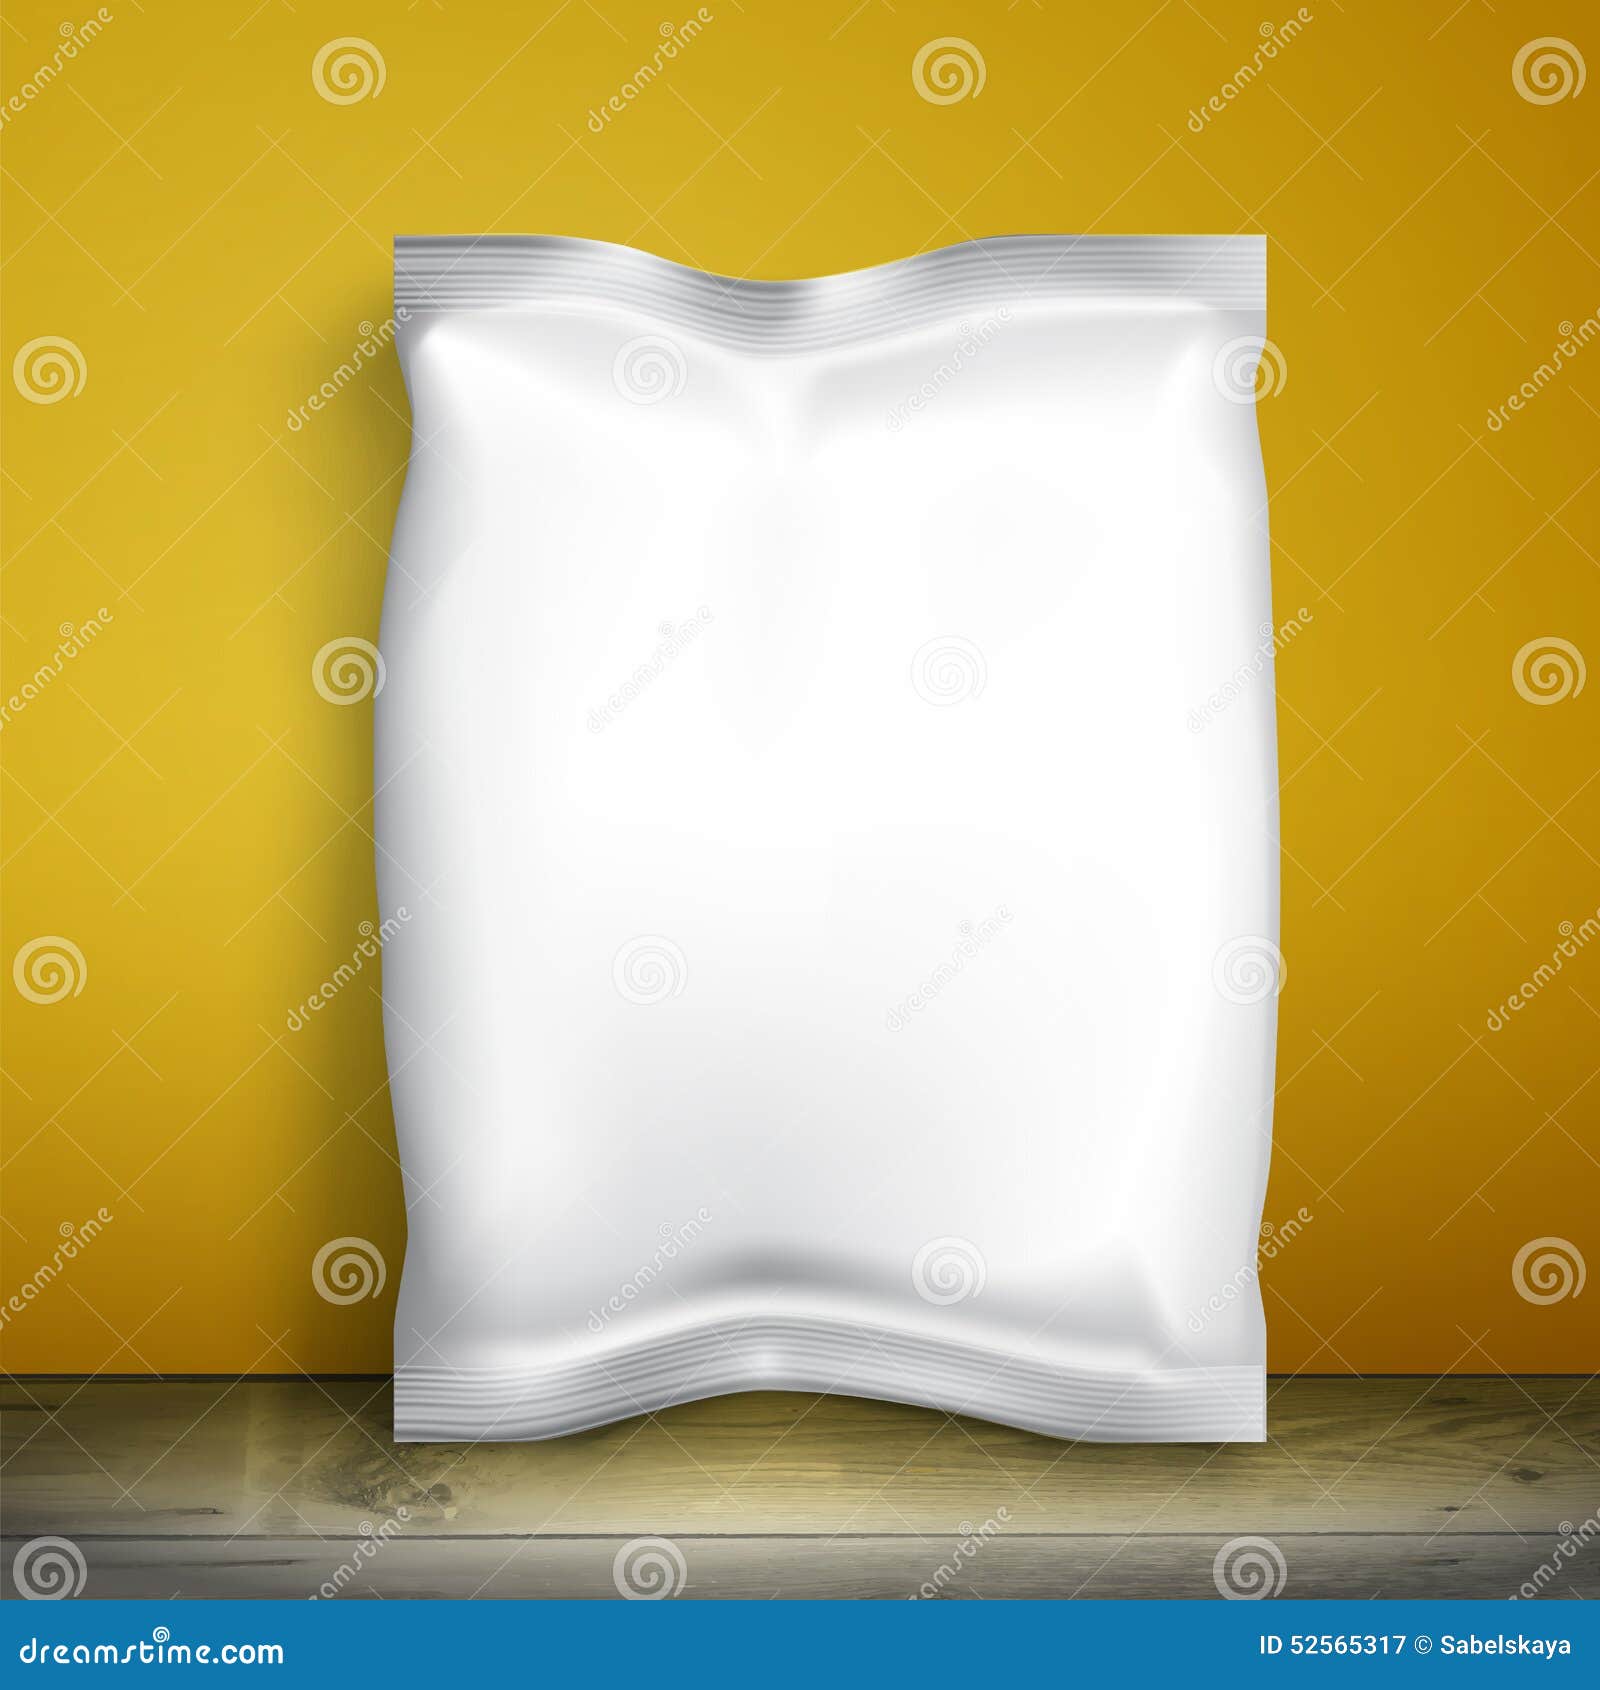 Mockup Foil Food Snack stock vector. Illustration of pouch - 52565317